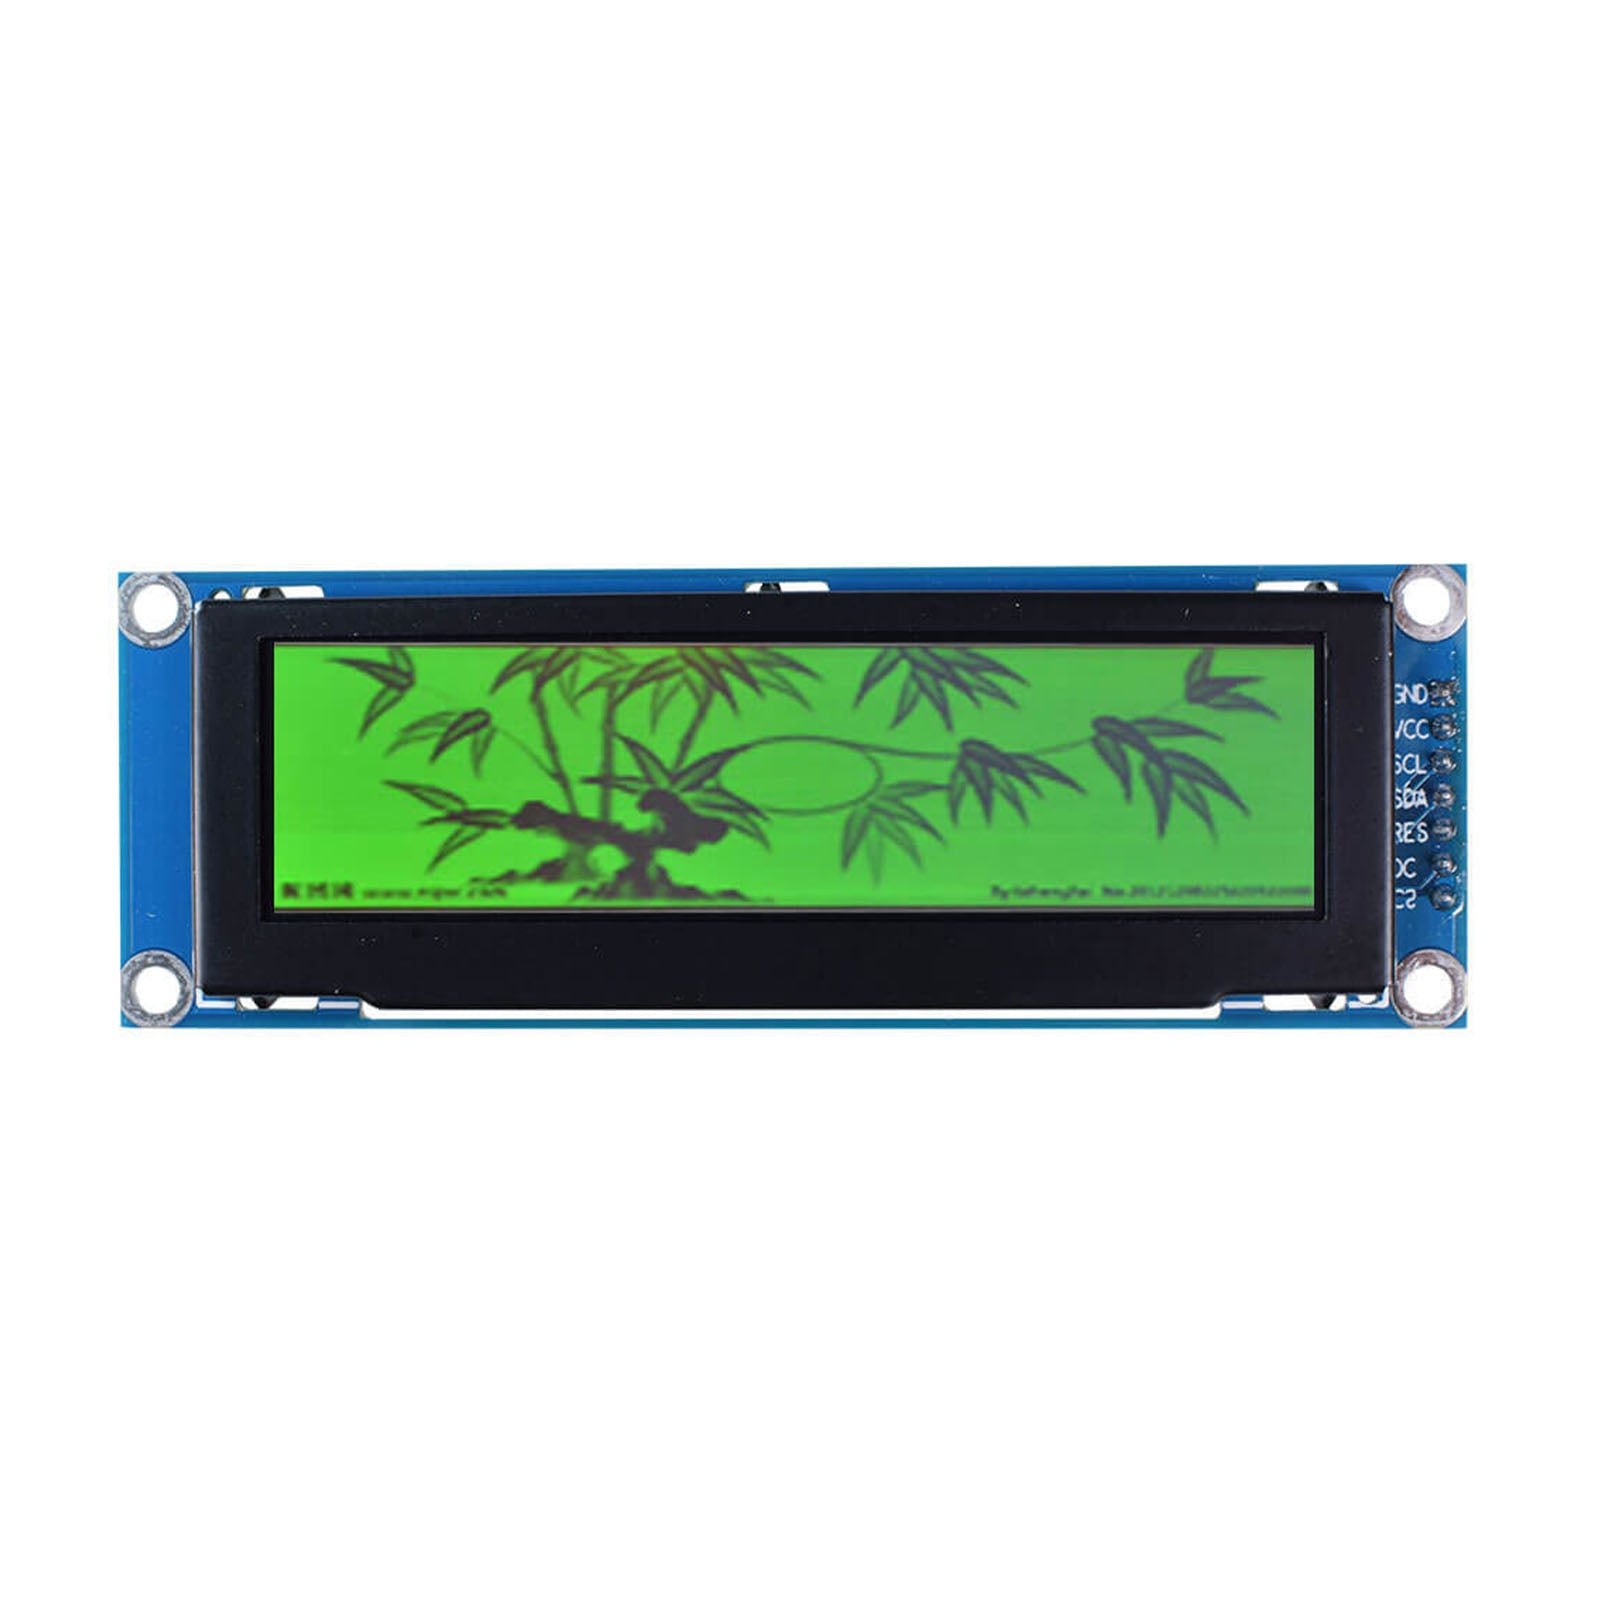 Monochrome green OLED display module showing a Chinese-style bamboo painting